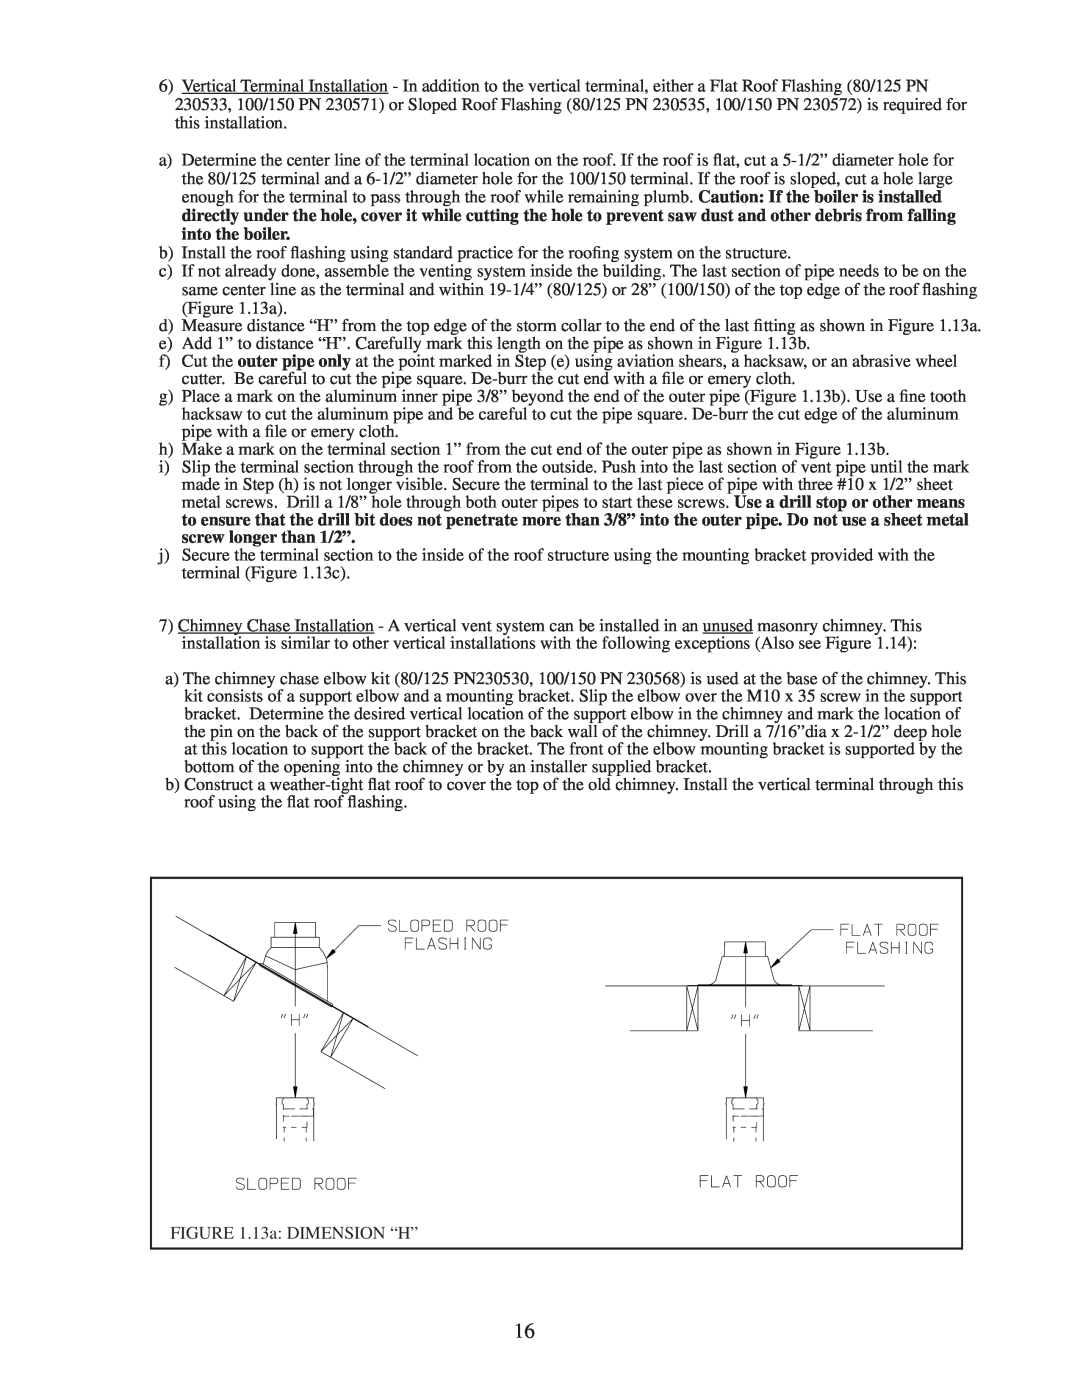 Crown Boiler M600 installation instructions 13a DIMENSION “H” 